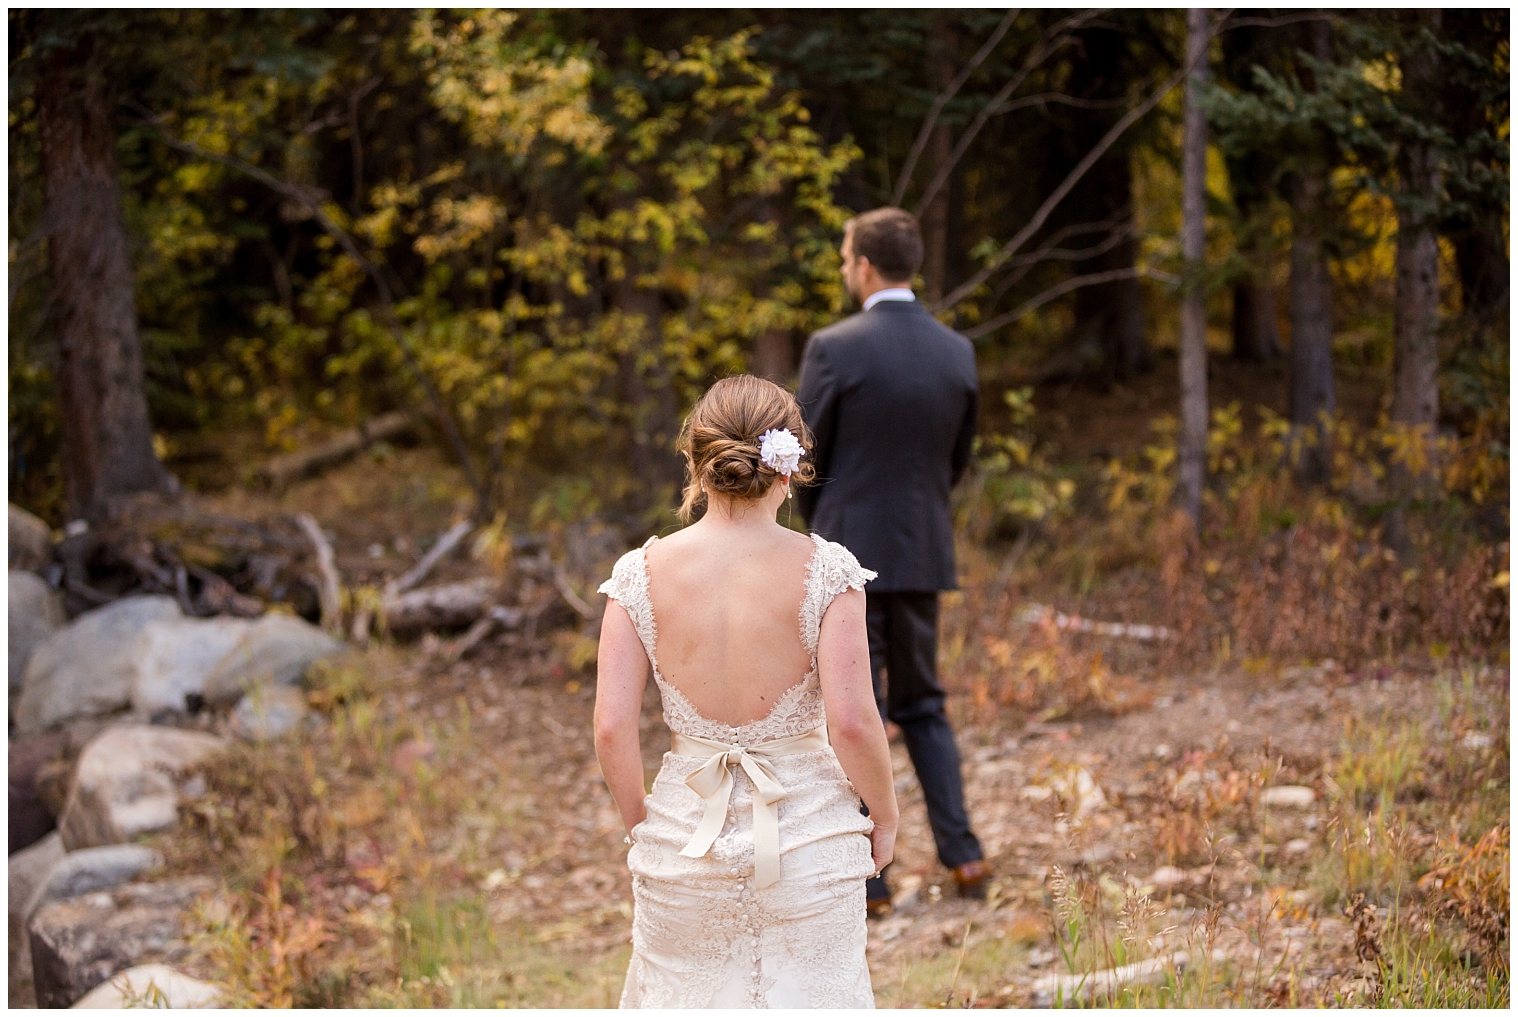 At their Colorado mountain wedding, the bride approaches her groom for their first look.